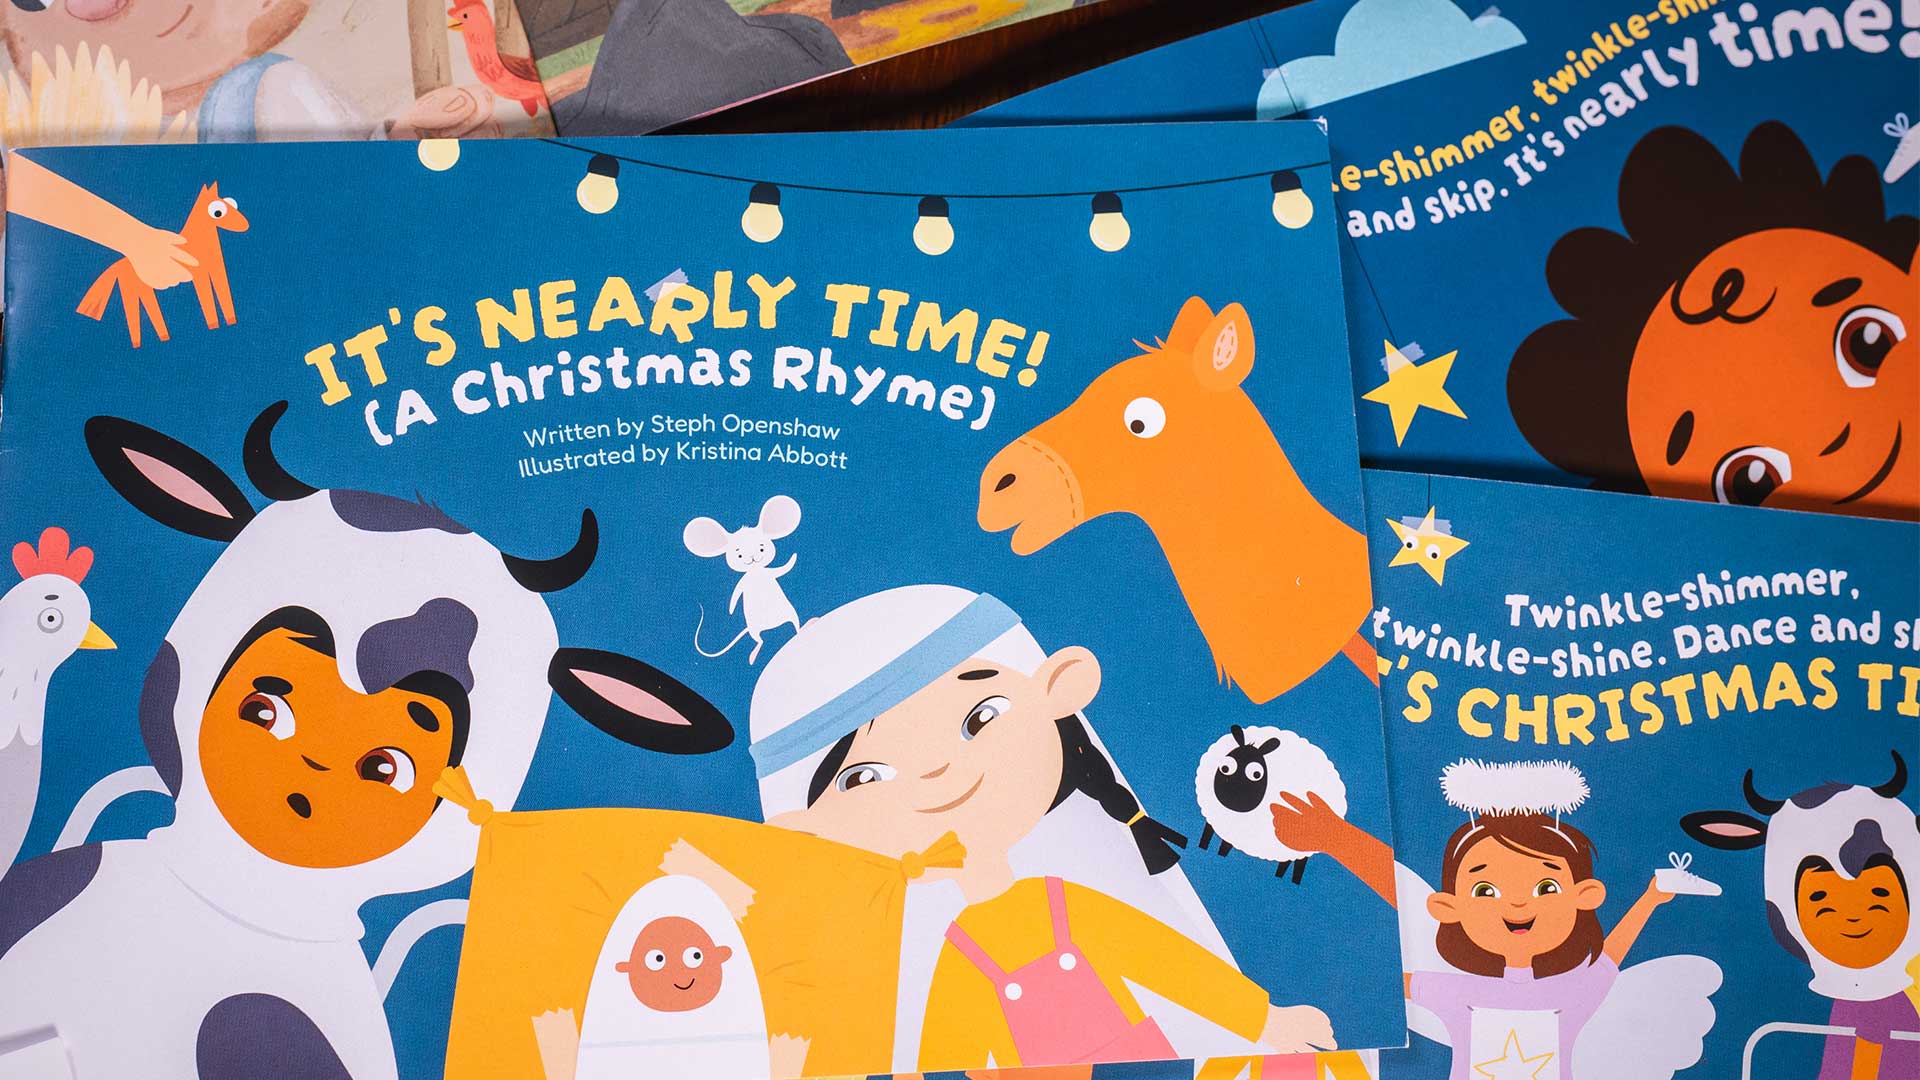 Follow along this Christmas rhyme with your toddler